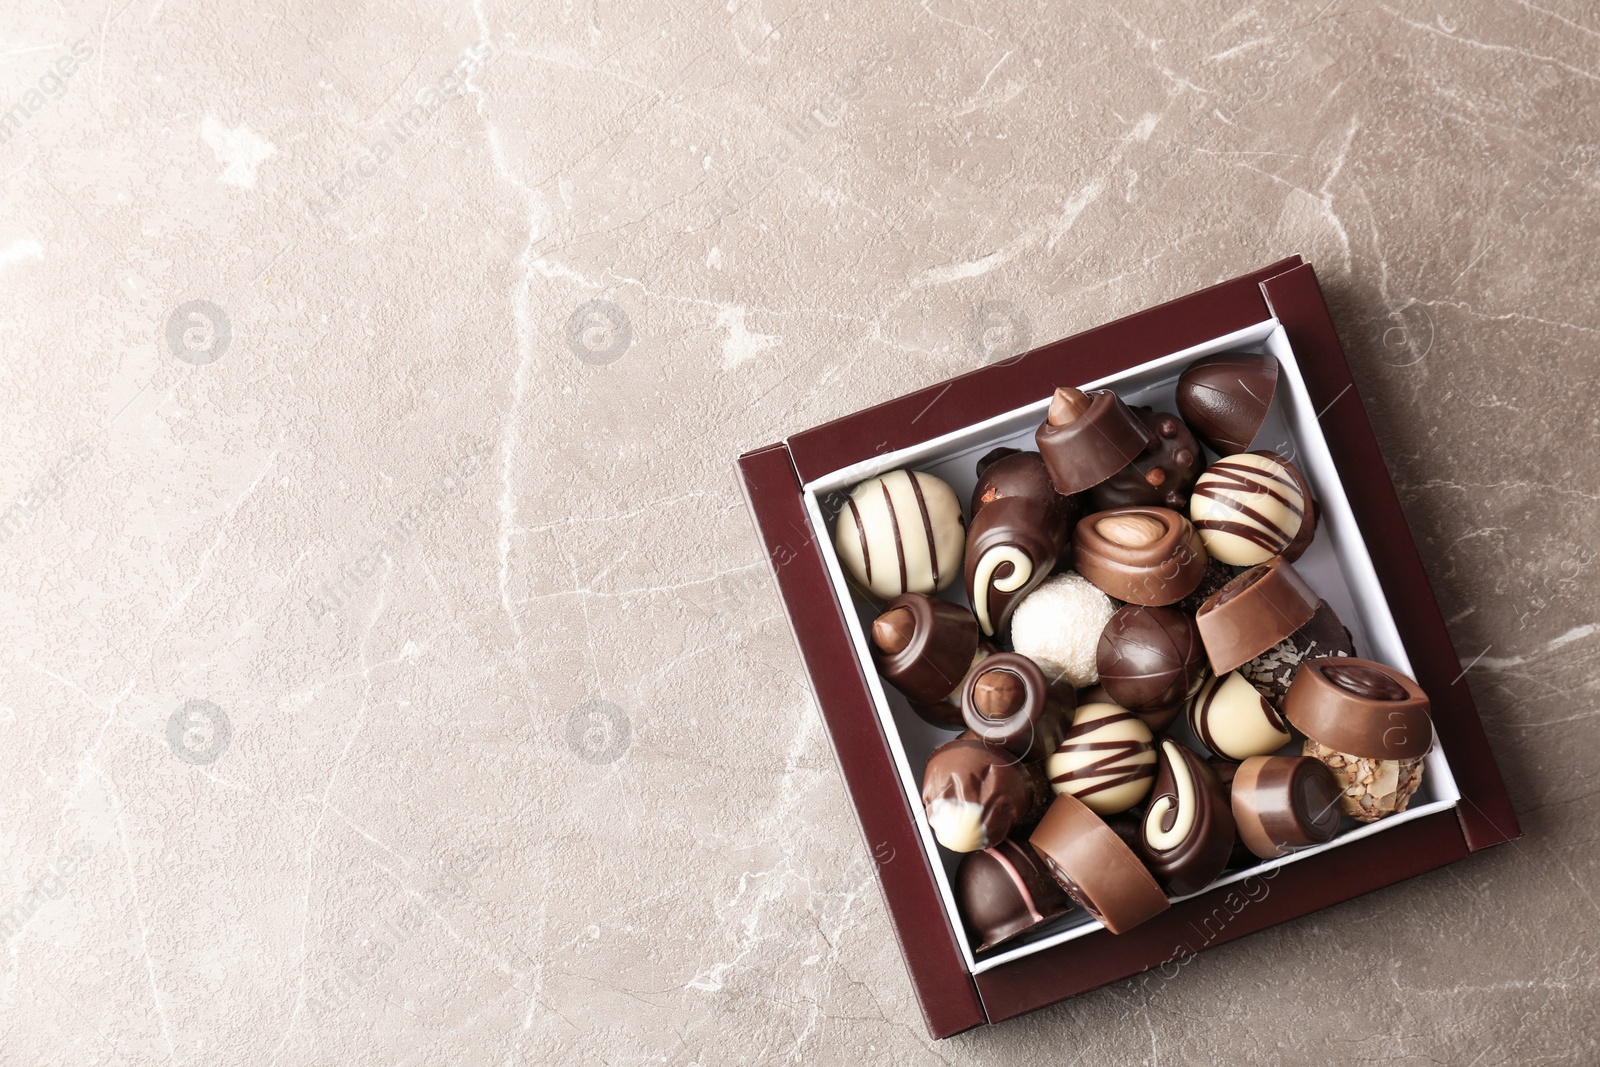 Photo of Box with different tasty chocolate candies on table, top view